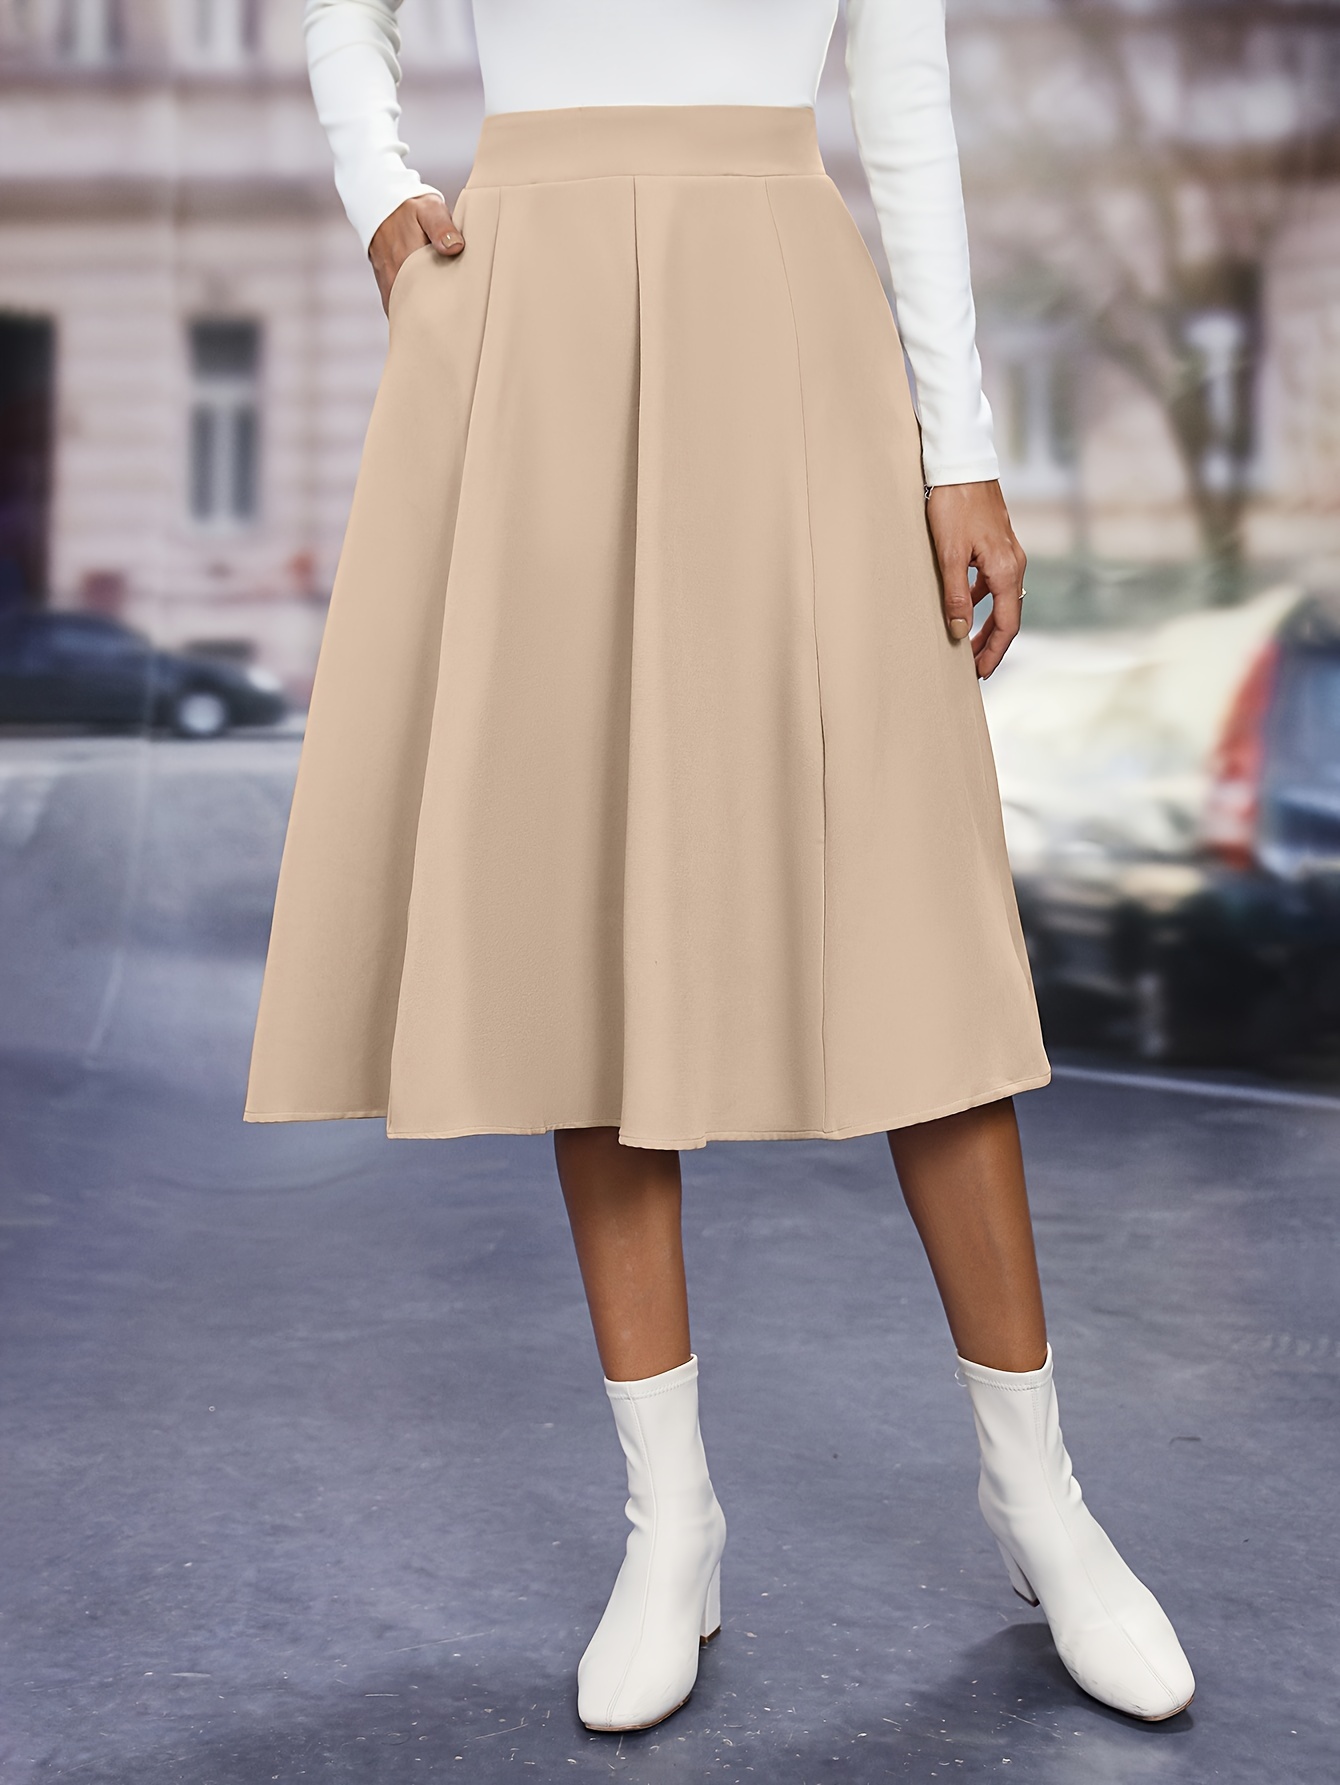 Versatile A-Line Belted Midi Skirt in Tan - Retro, Indie and